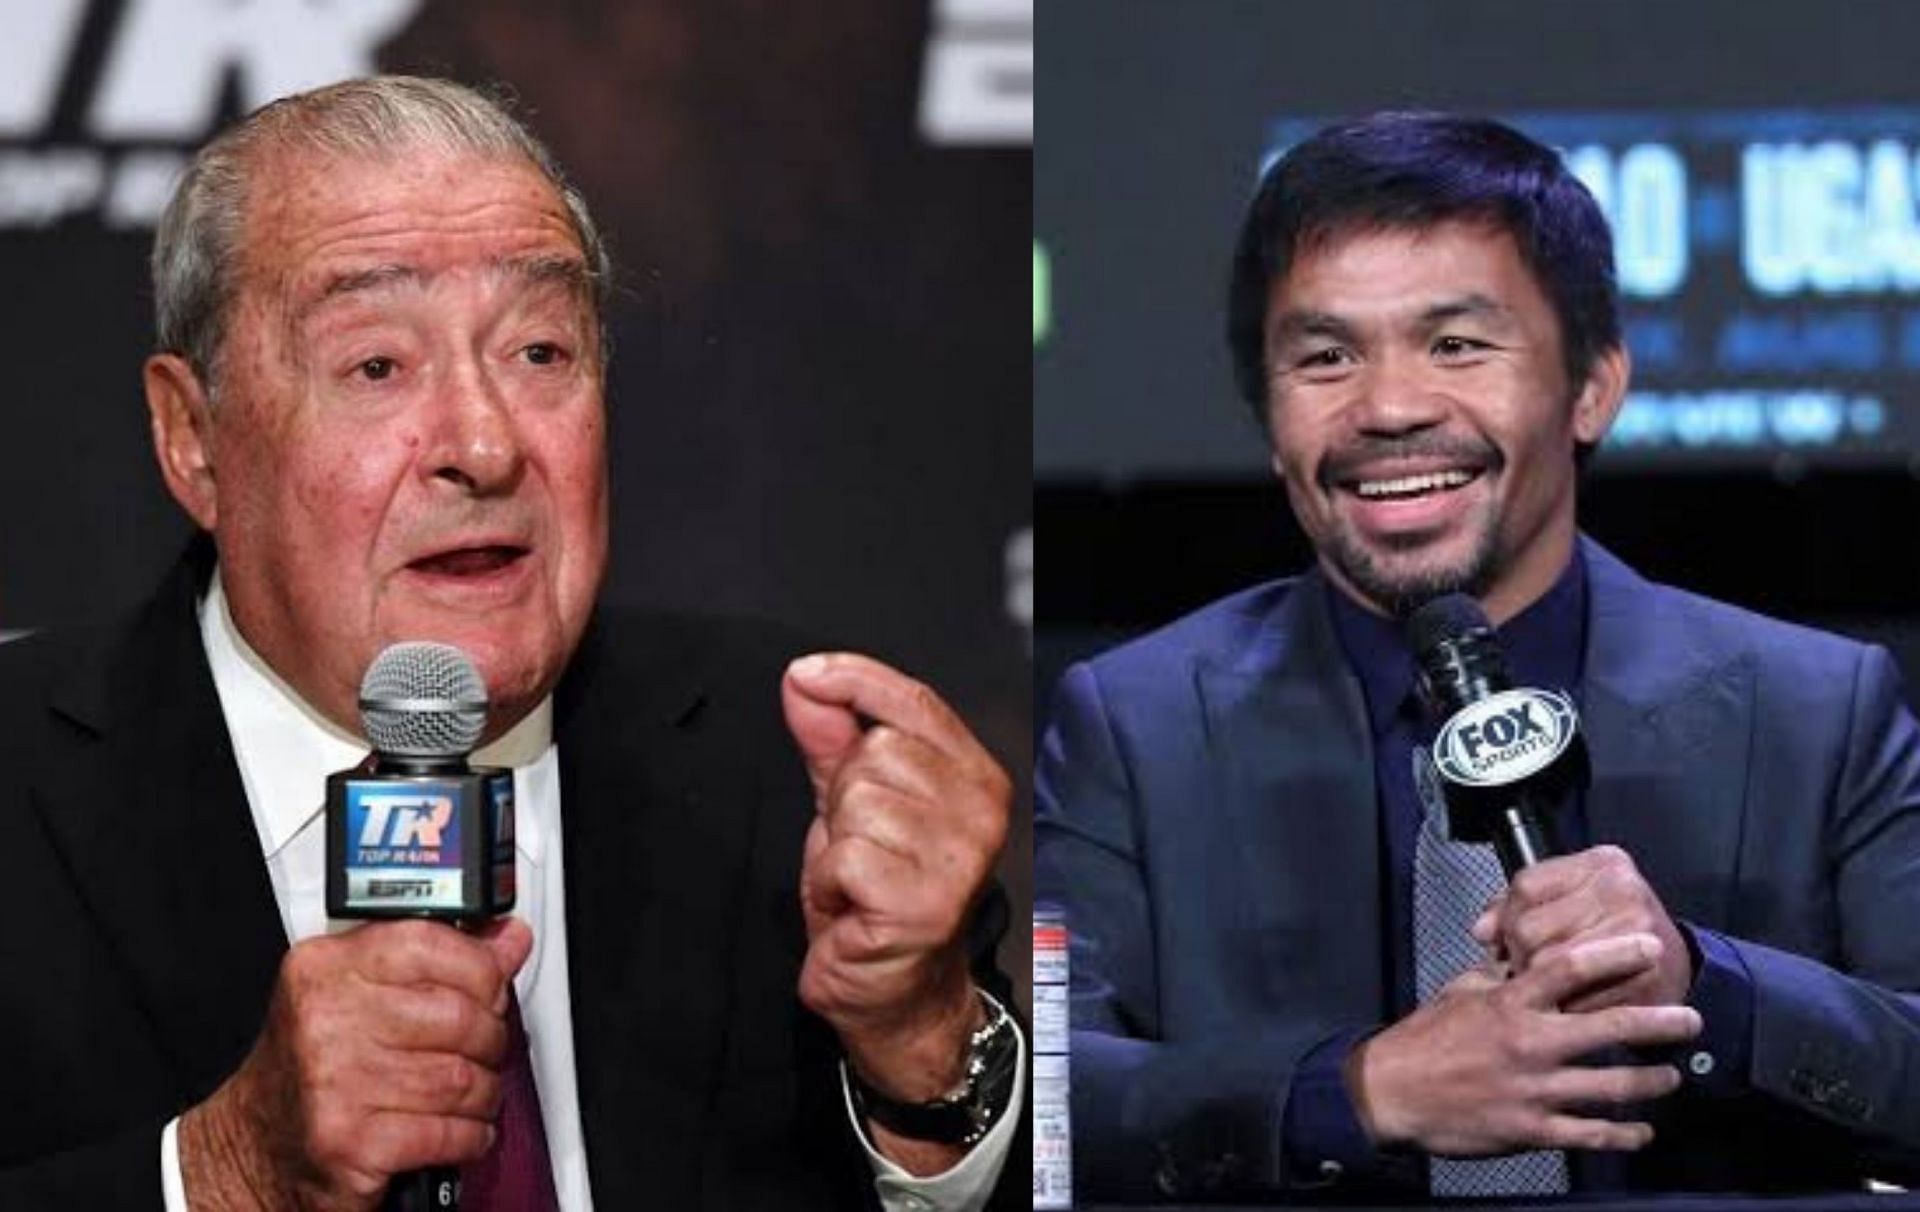 Bob Arum and Manny Pacquiao. (Photos by Getty Images)